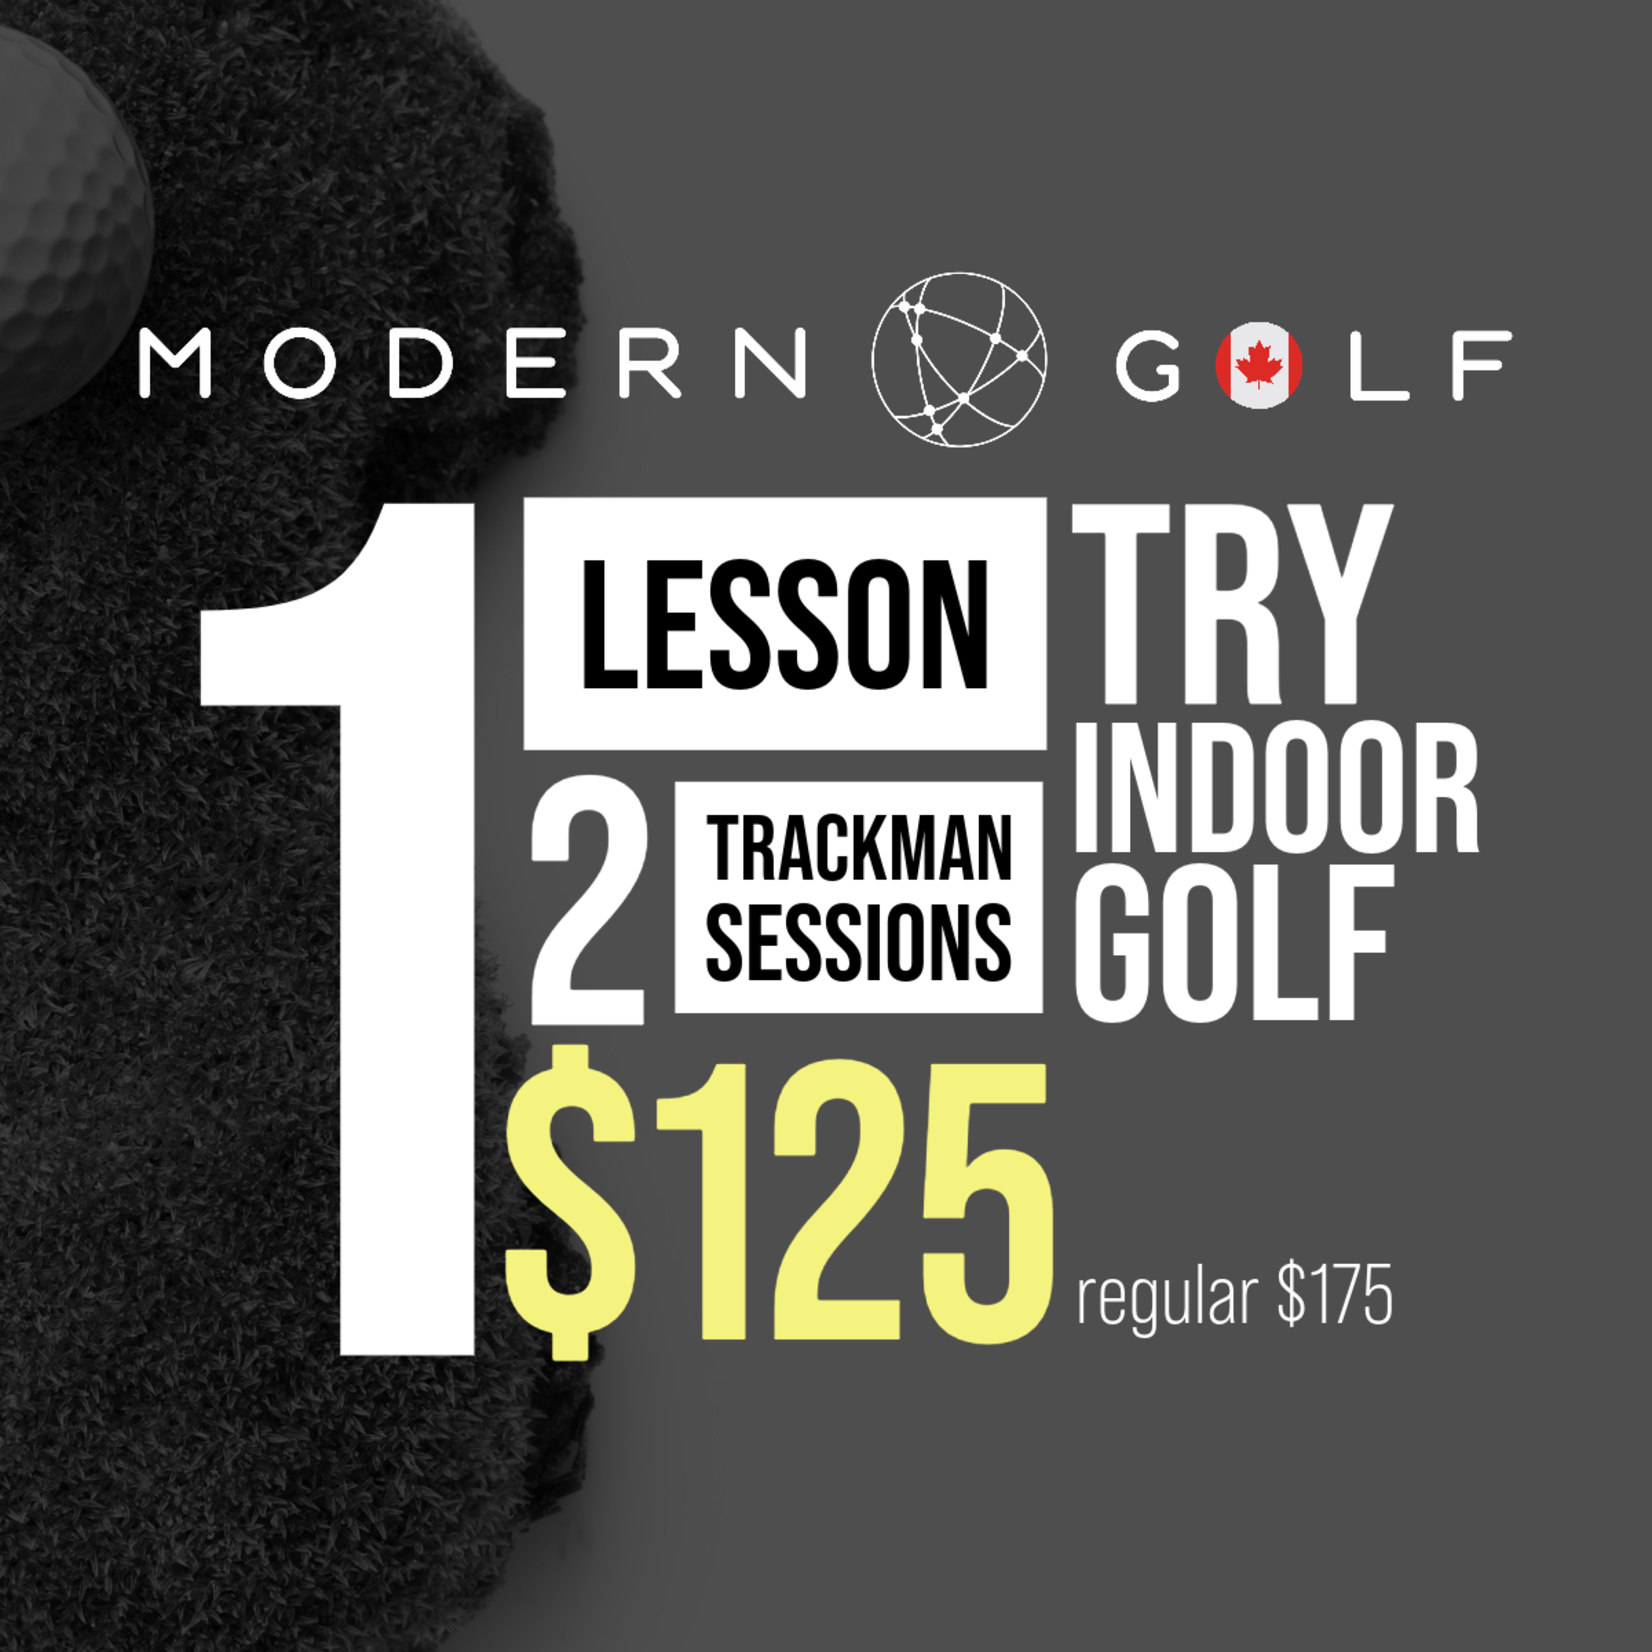 Modern Golf 1 Lesson + 2 TrackMan Sessions - Try Indoor Golf